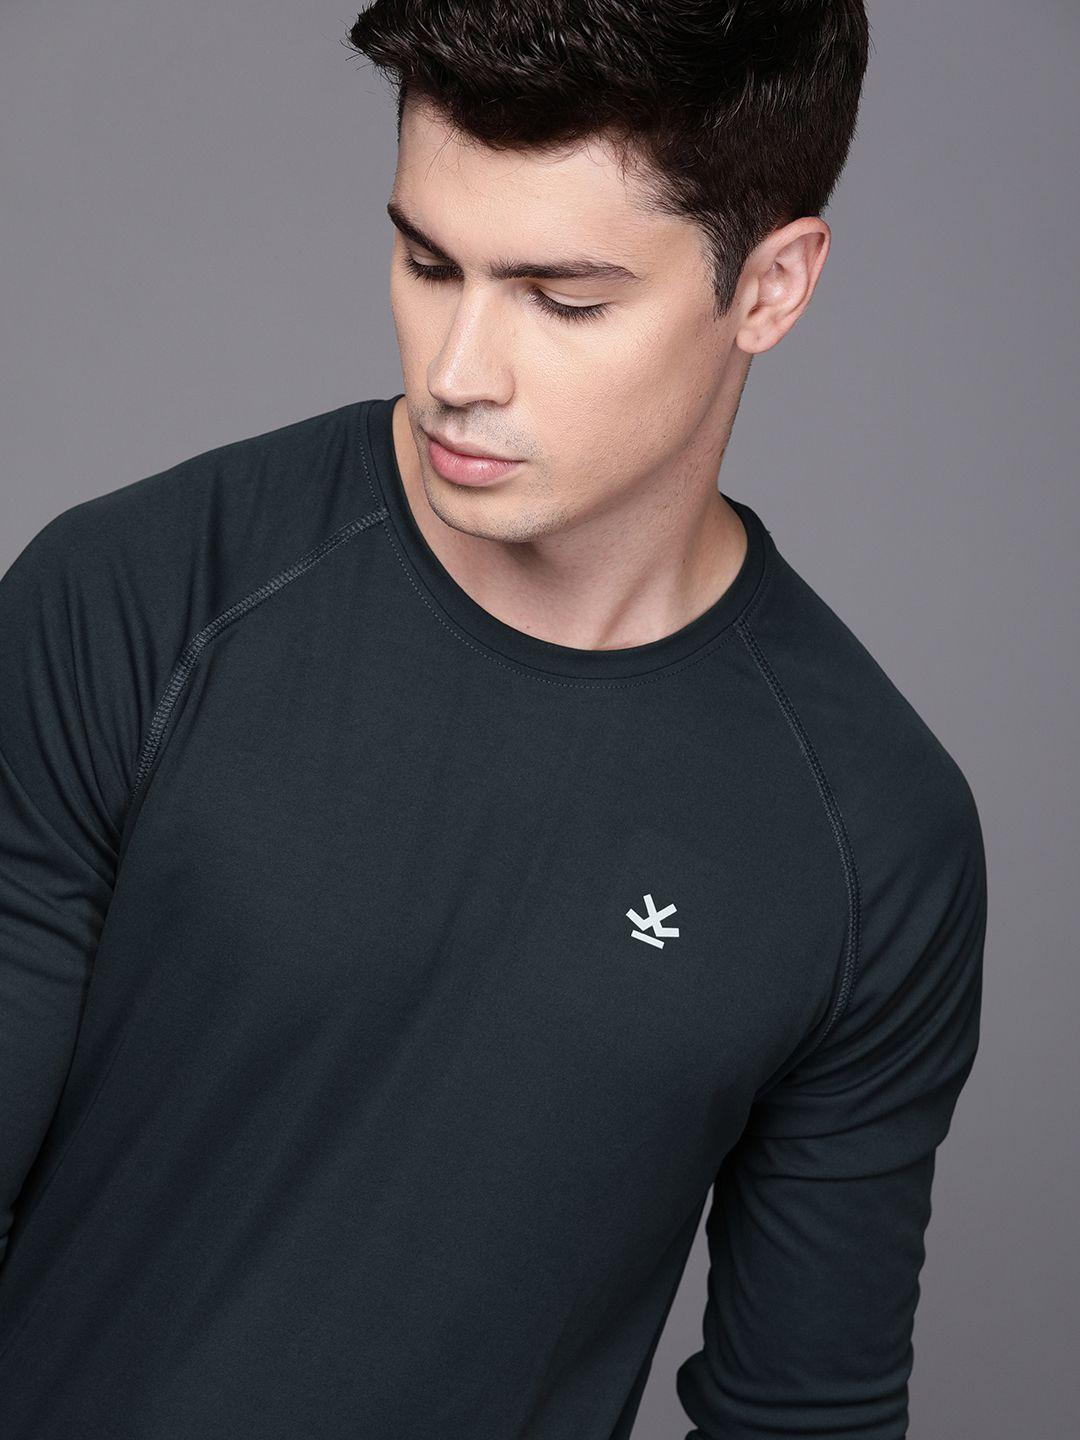 wrogn-active-men-charcoal-grey-solid-round-neck-t-shirt